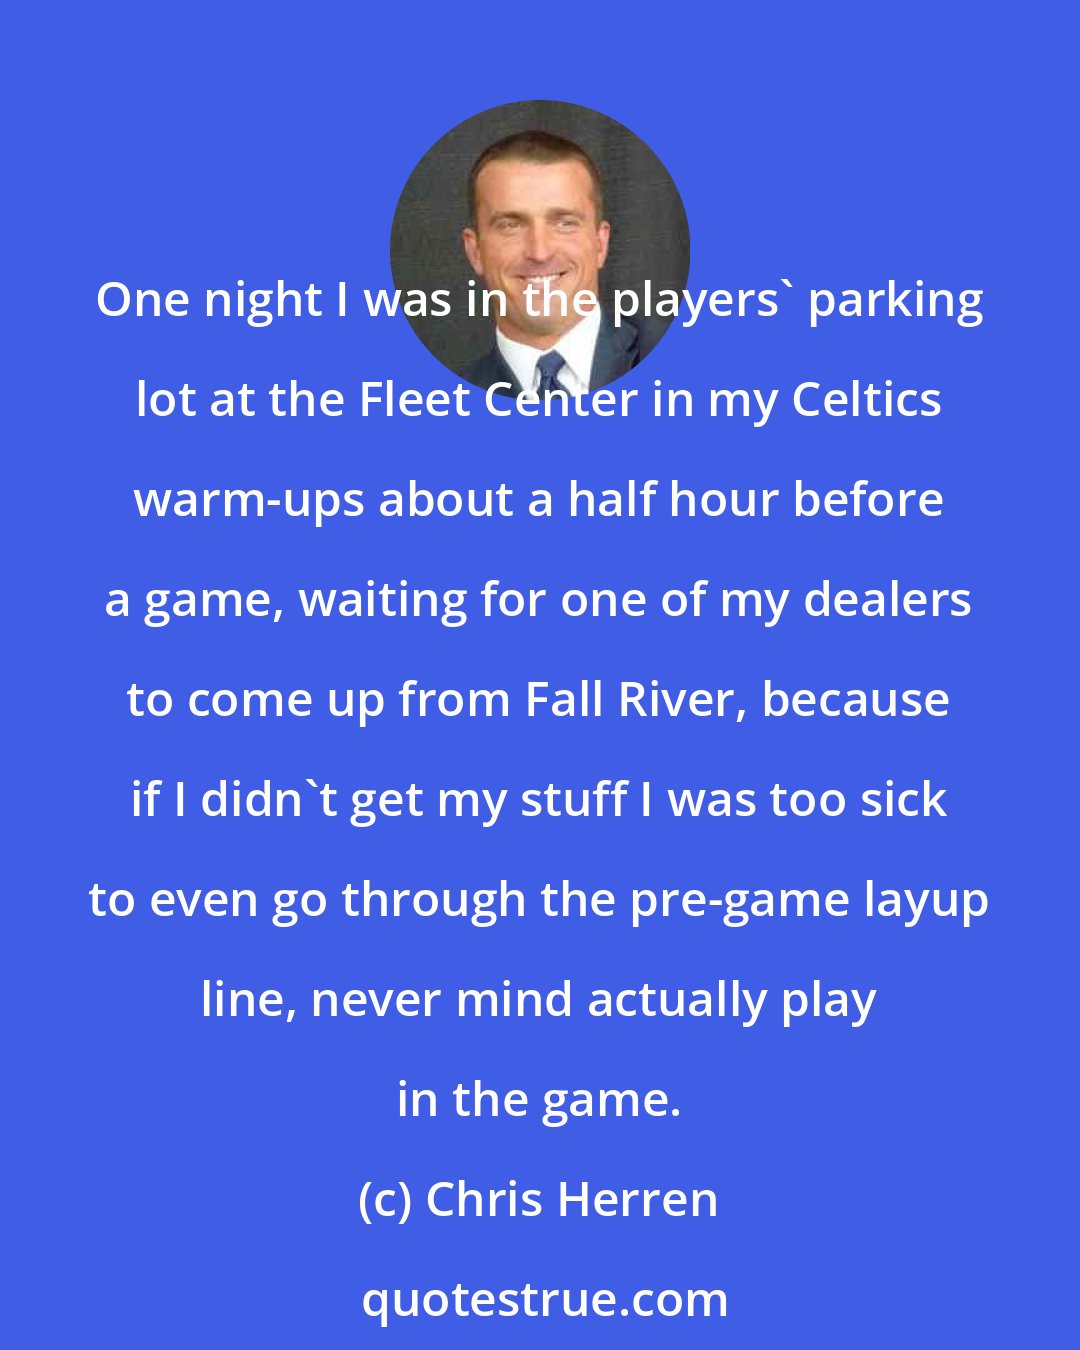 Chris Herren: One night I was in the players' parking lot at the Fleet Center in my Celtics warm-ups about a half hour before a game, waiting for one of my dealers to come up from Fall River, because if I didn't get my stuff I was too sick to even go through the pre-game layup line, never mind actually play in the game.